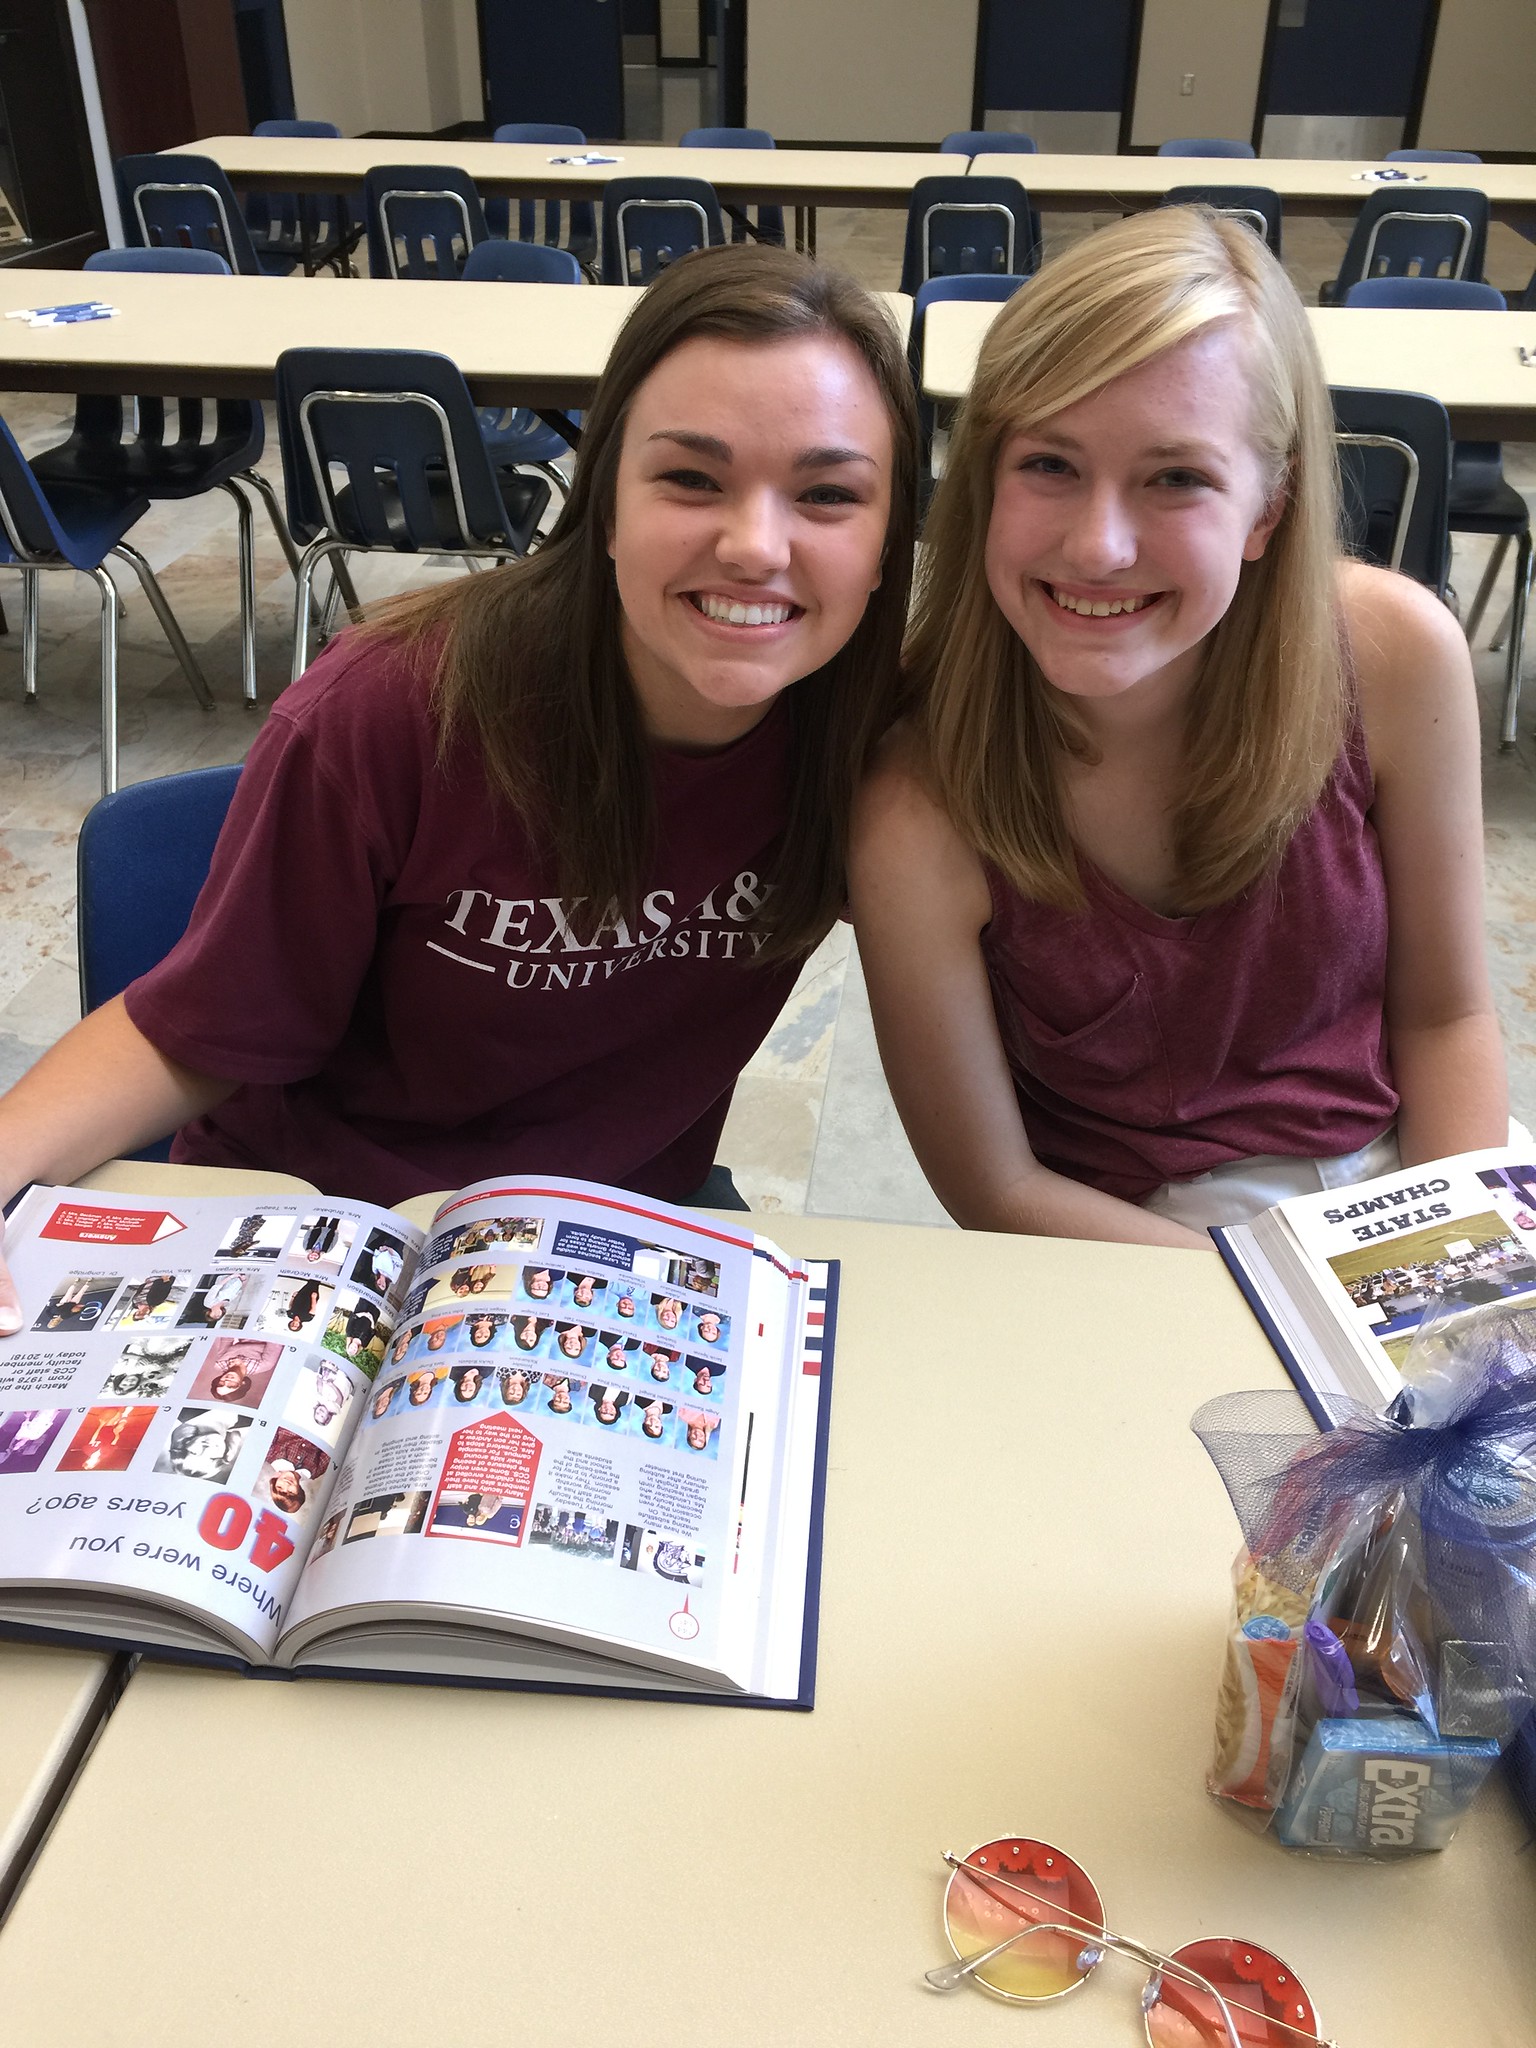 CLASS OF 2018 YEARBOOK SIGNING & COLLEGE SEND-OFF